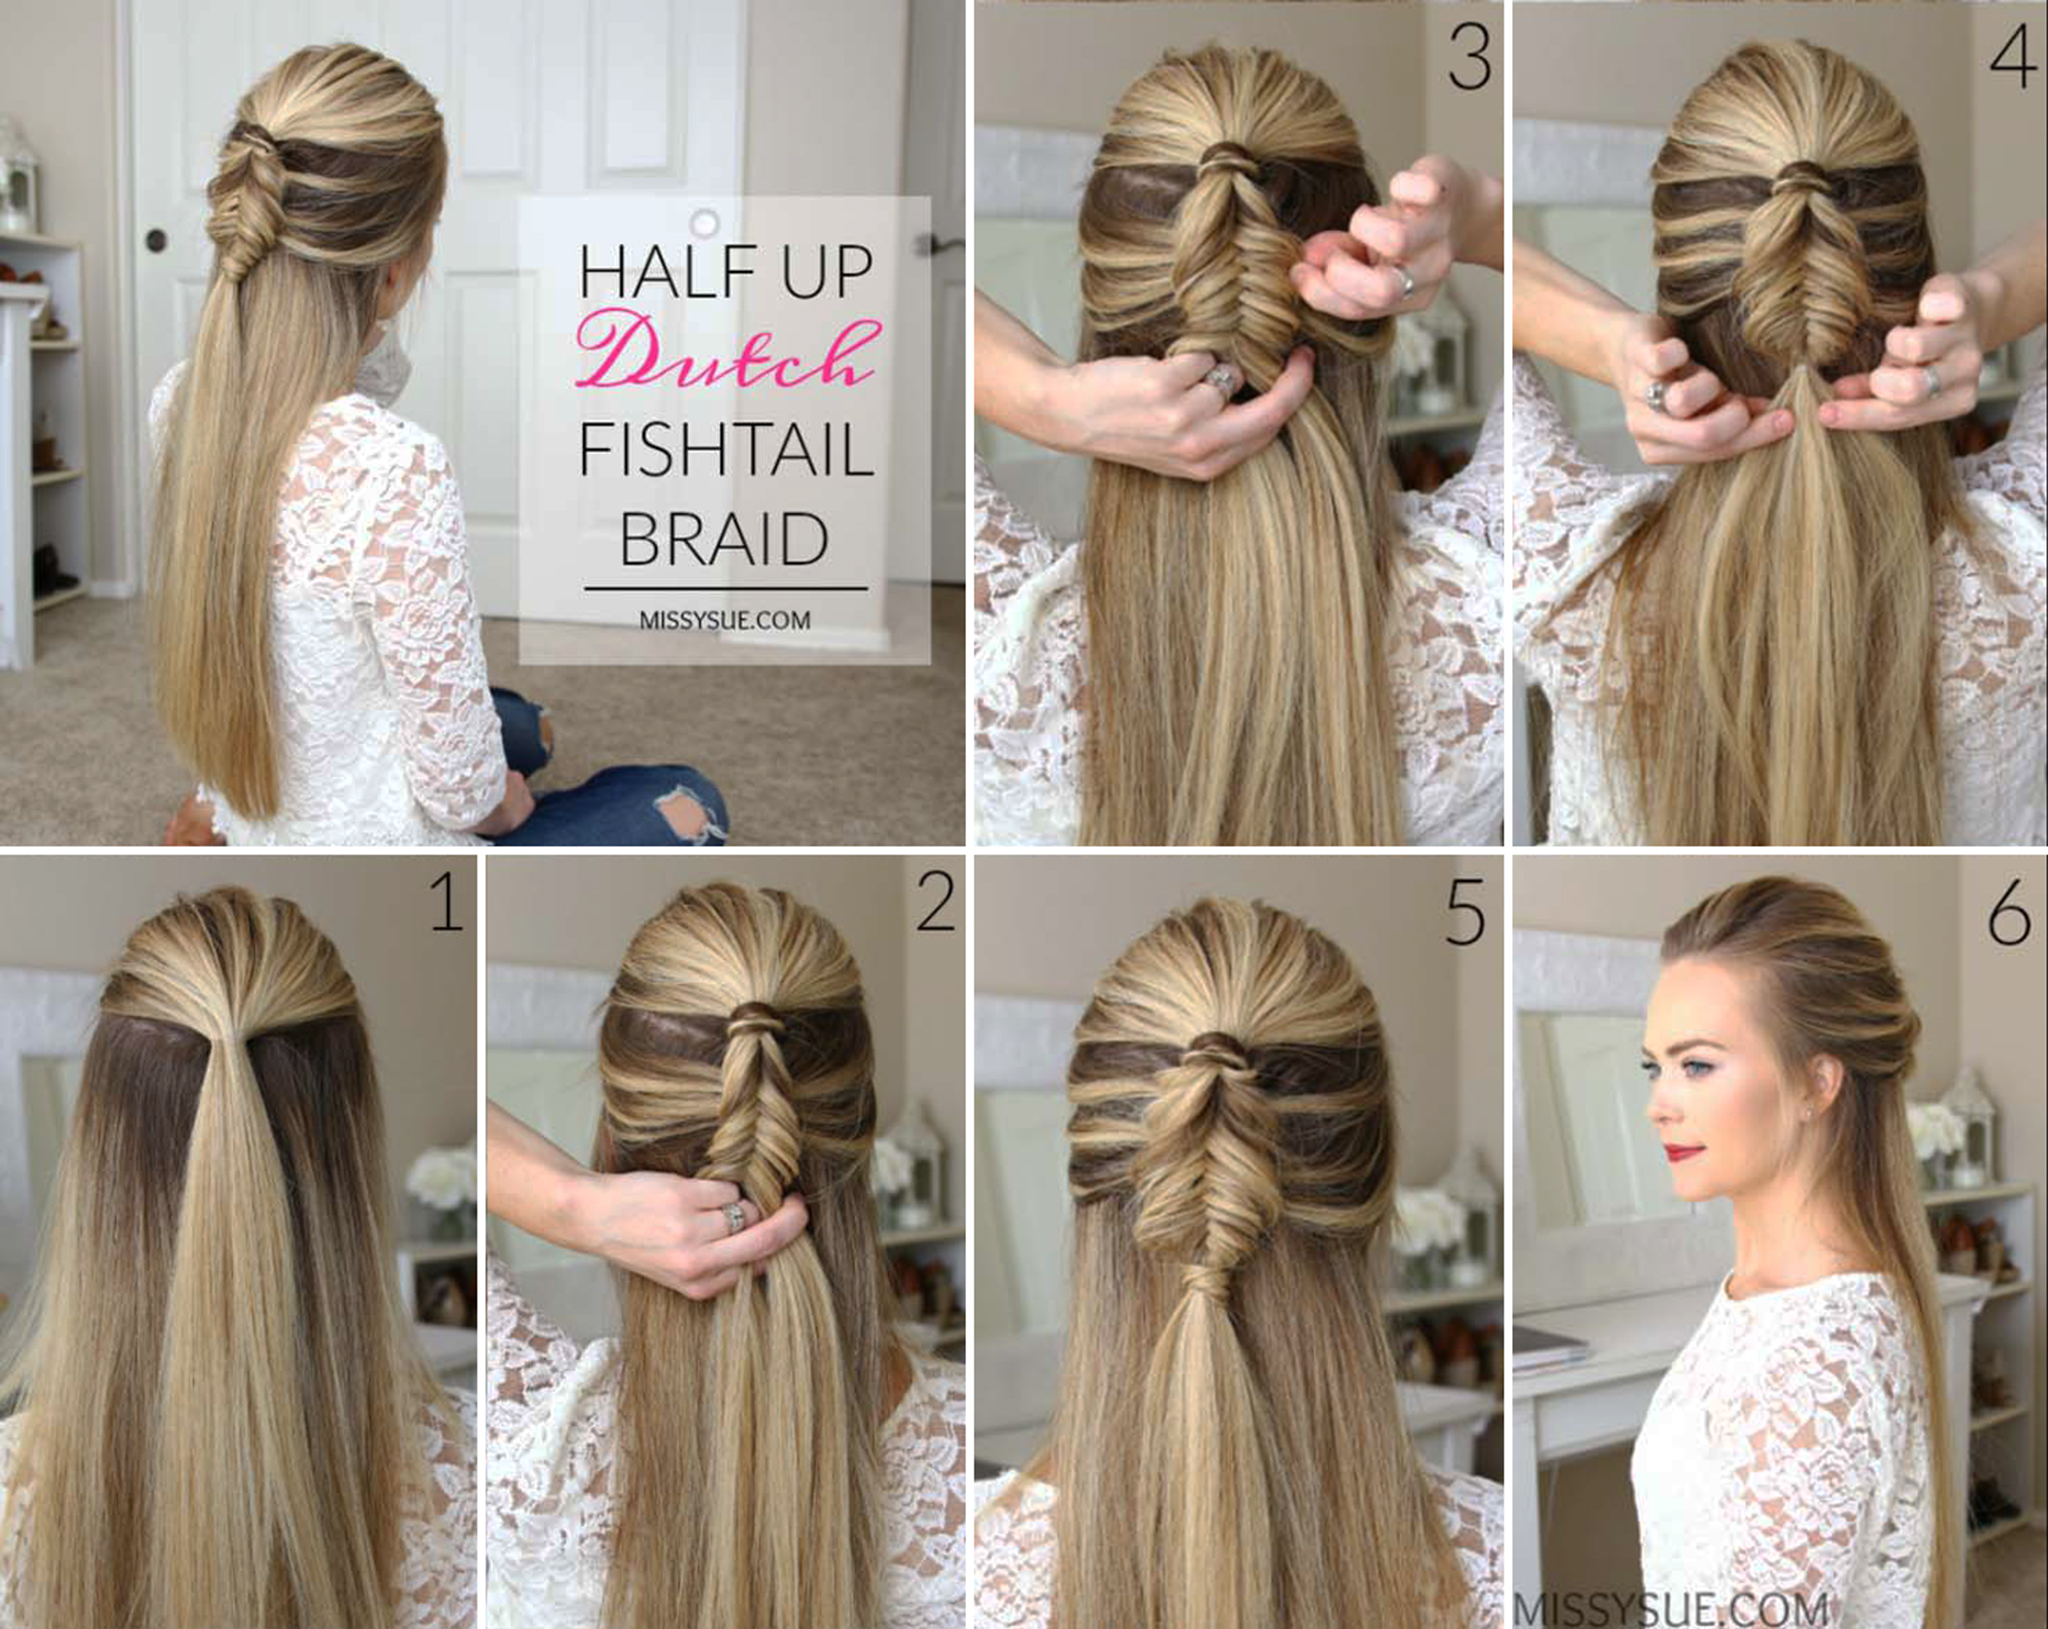 Learn – How To Create Knitted Lace Braid Hairstyle, See Tutorial